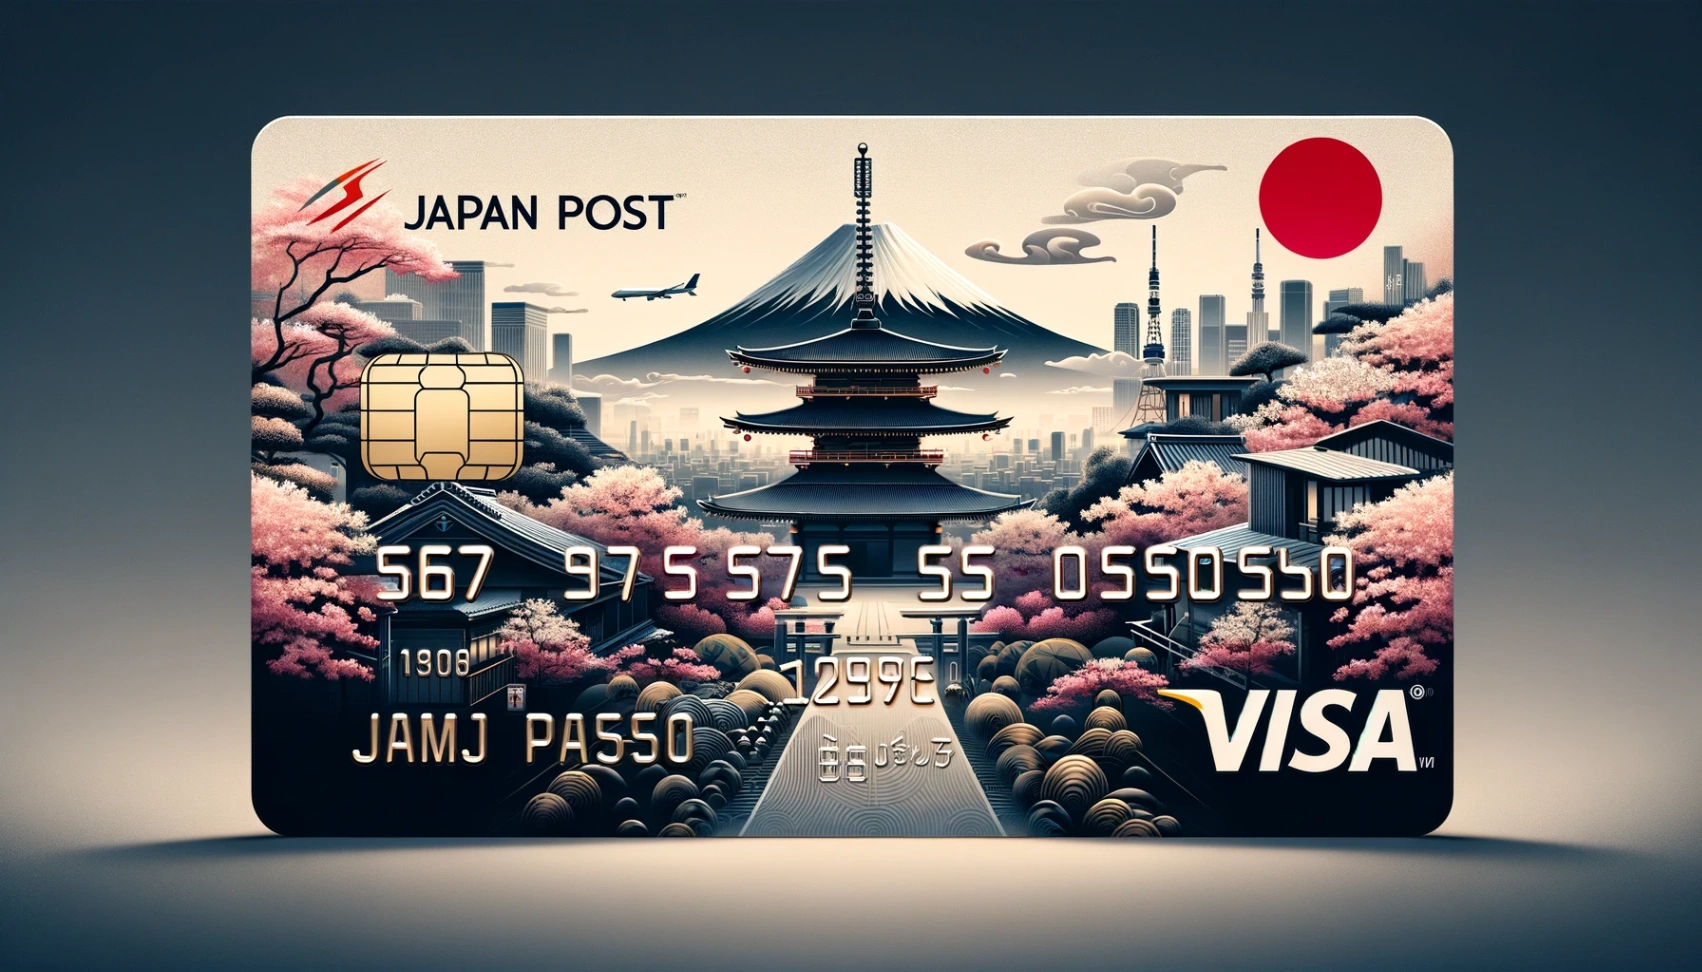 Japan Post Visa Credit Card - Learn How to Easily Apply